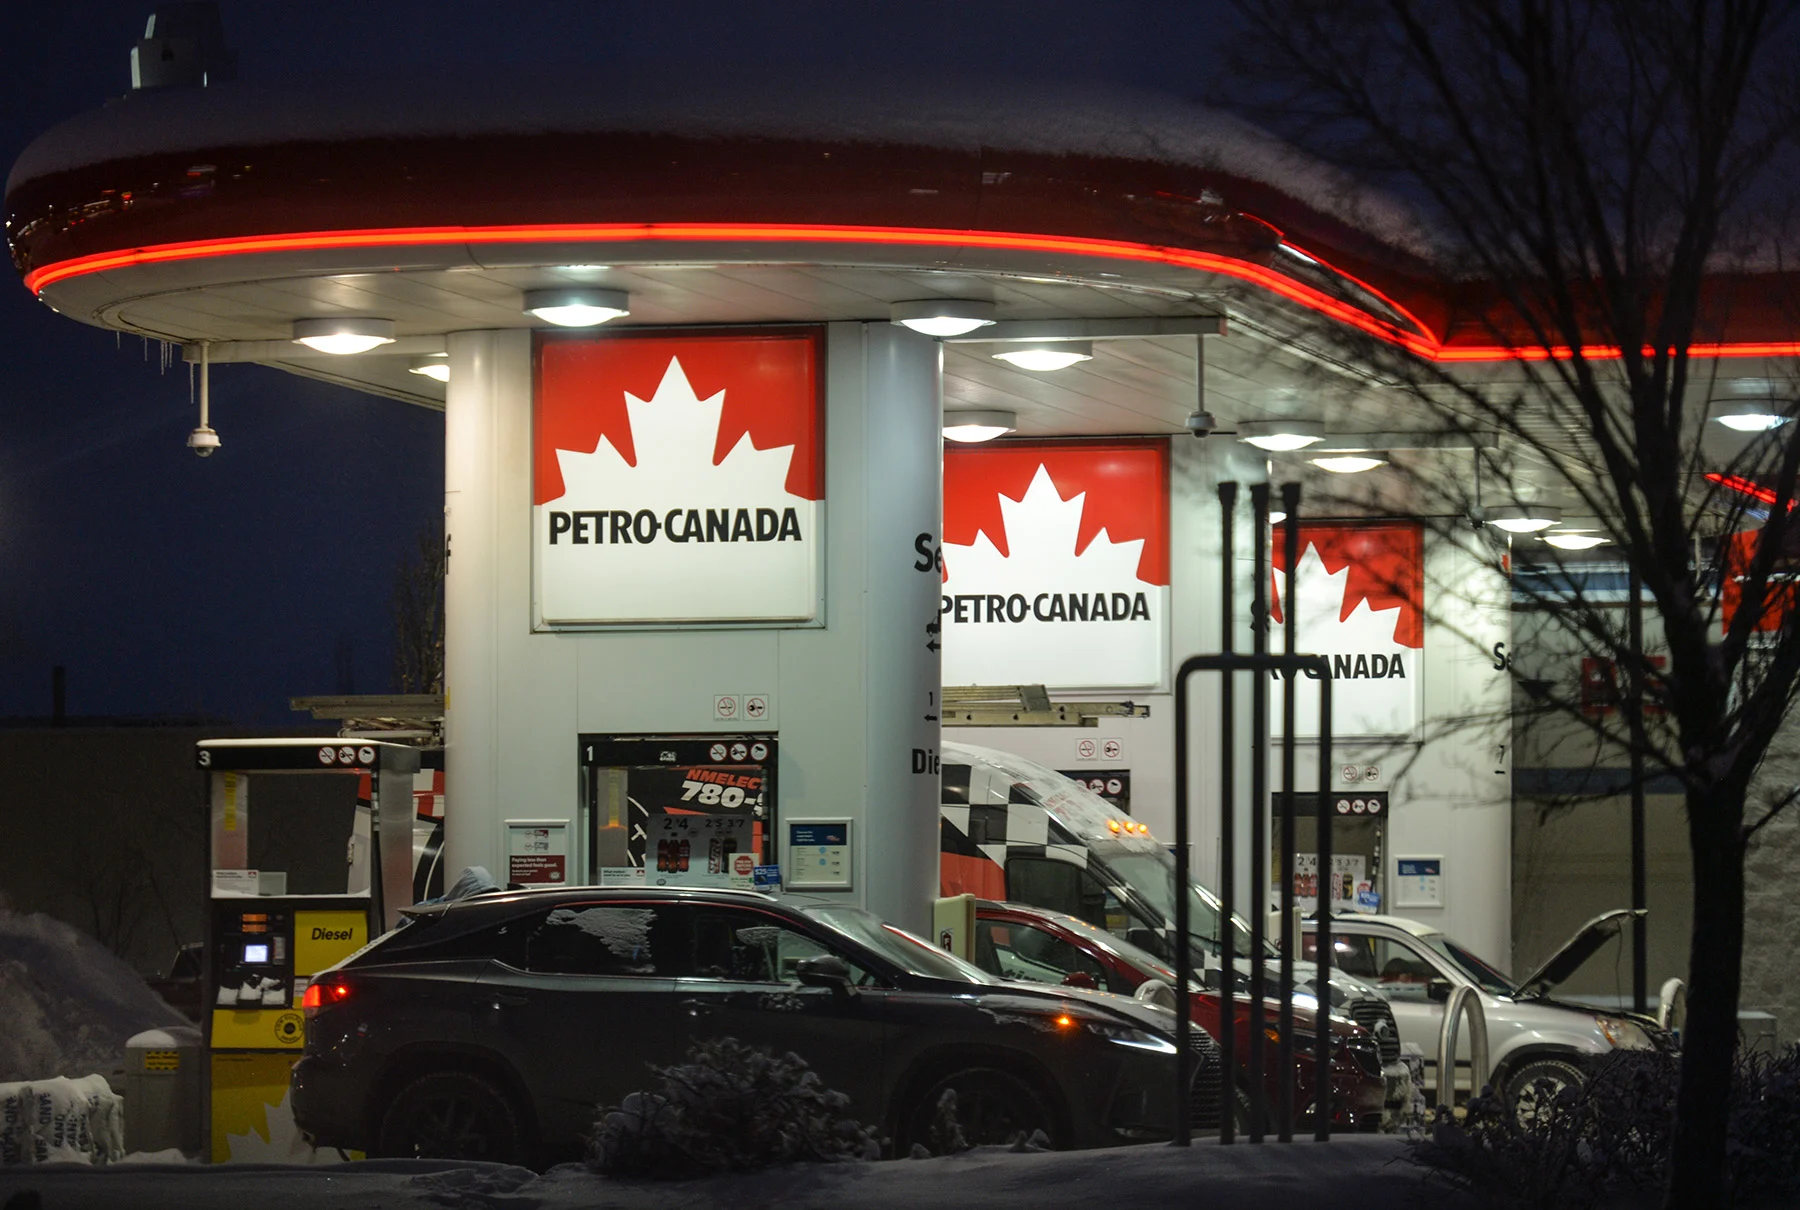 Daily life at a Petro-Canada gas station in Edmonton during the COVID-19 pandemic. (NurPhoto/ Contributor/ Getty Images)